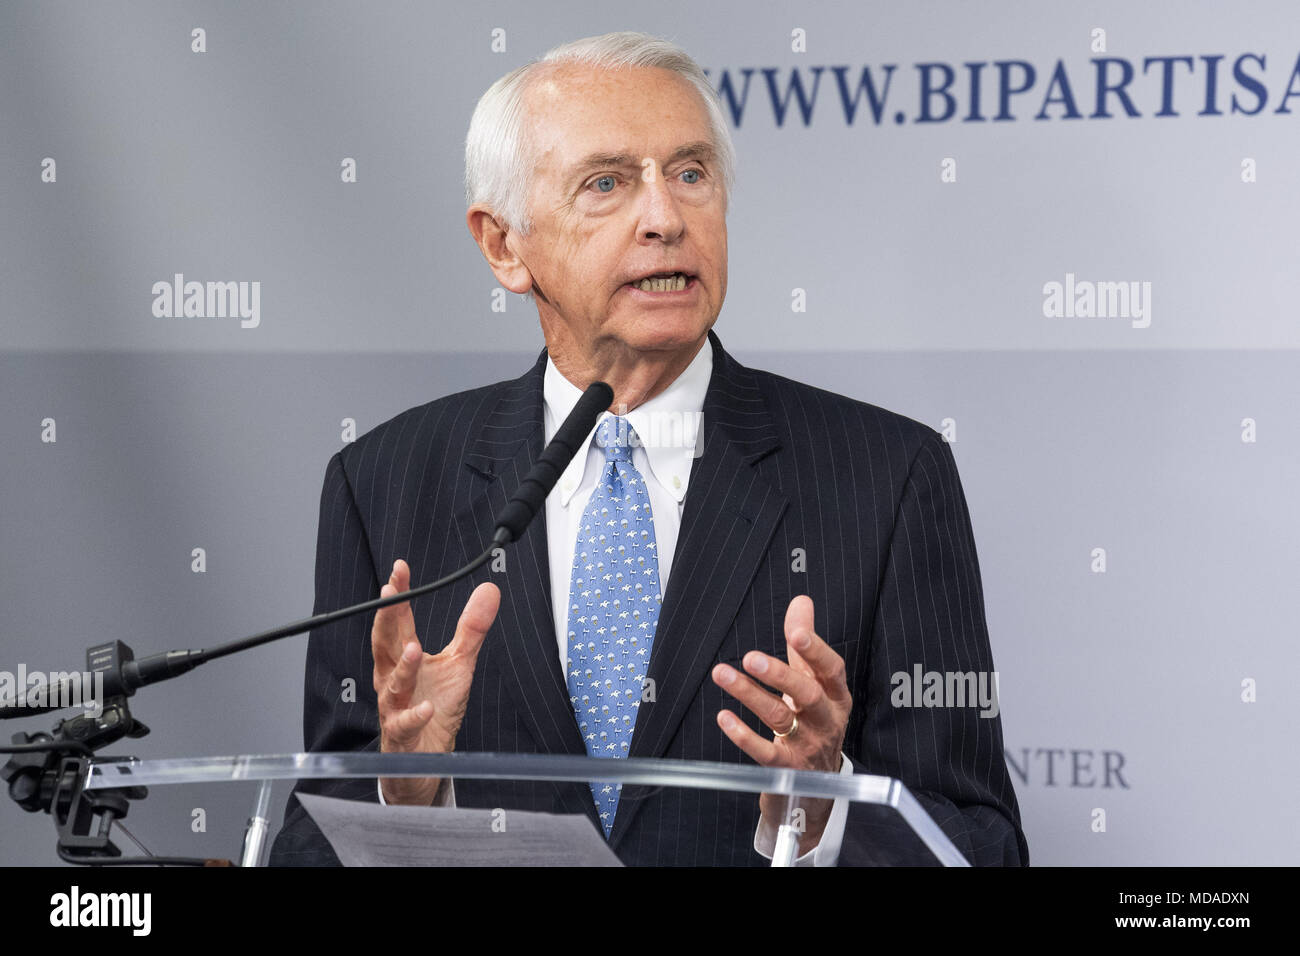 Washington, DC, USA. 17th Apr, 2018. Former Kentucky Governor STEVE BESHEAR speaking at the Restoring Our Democracy program at the Bipartisan Policy Center in Washington, DC on April 17, 2018 Credit: Michael Brochstein/ZUMA Wire/Alamy Live News Stock Photo